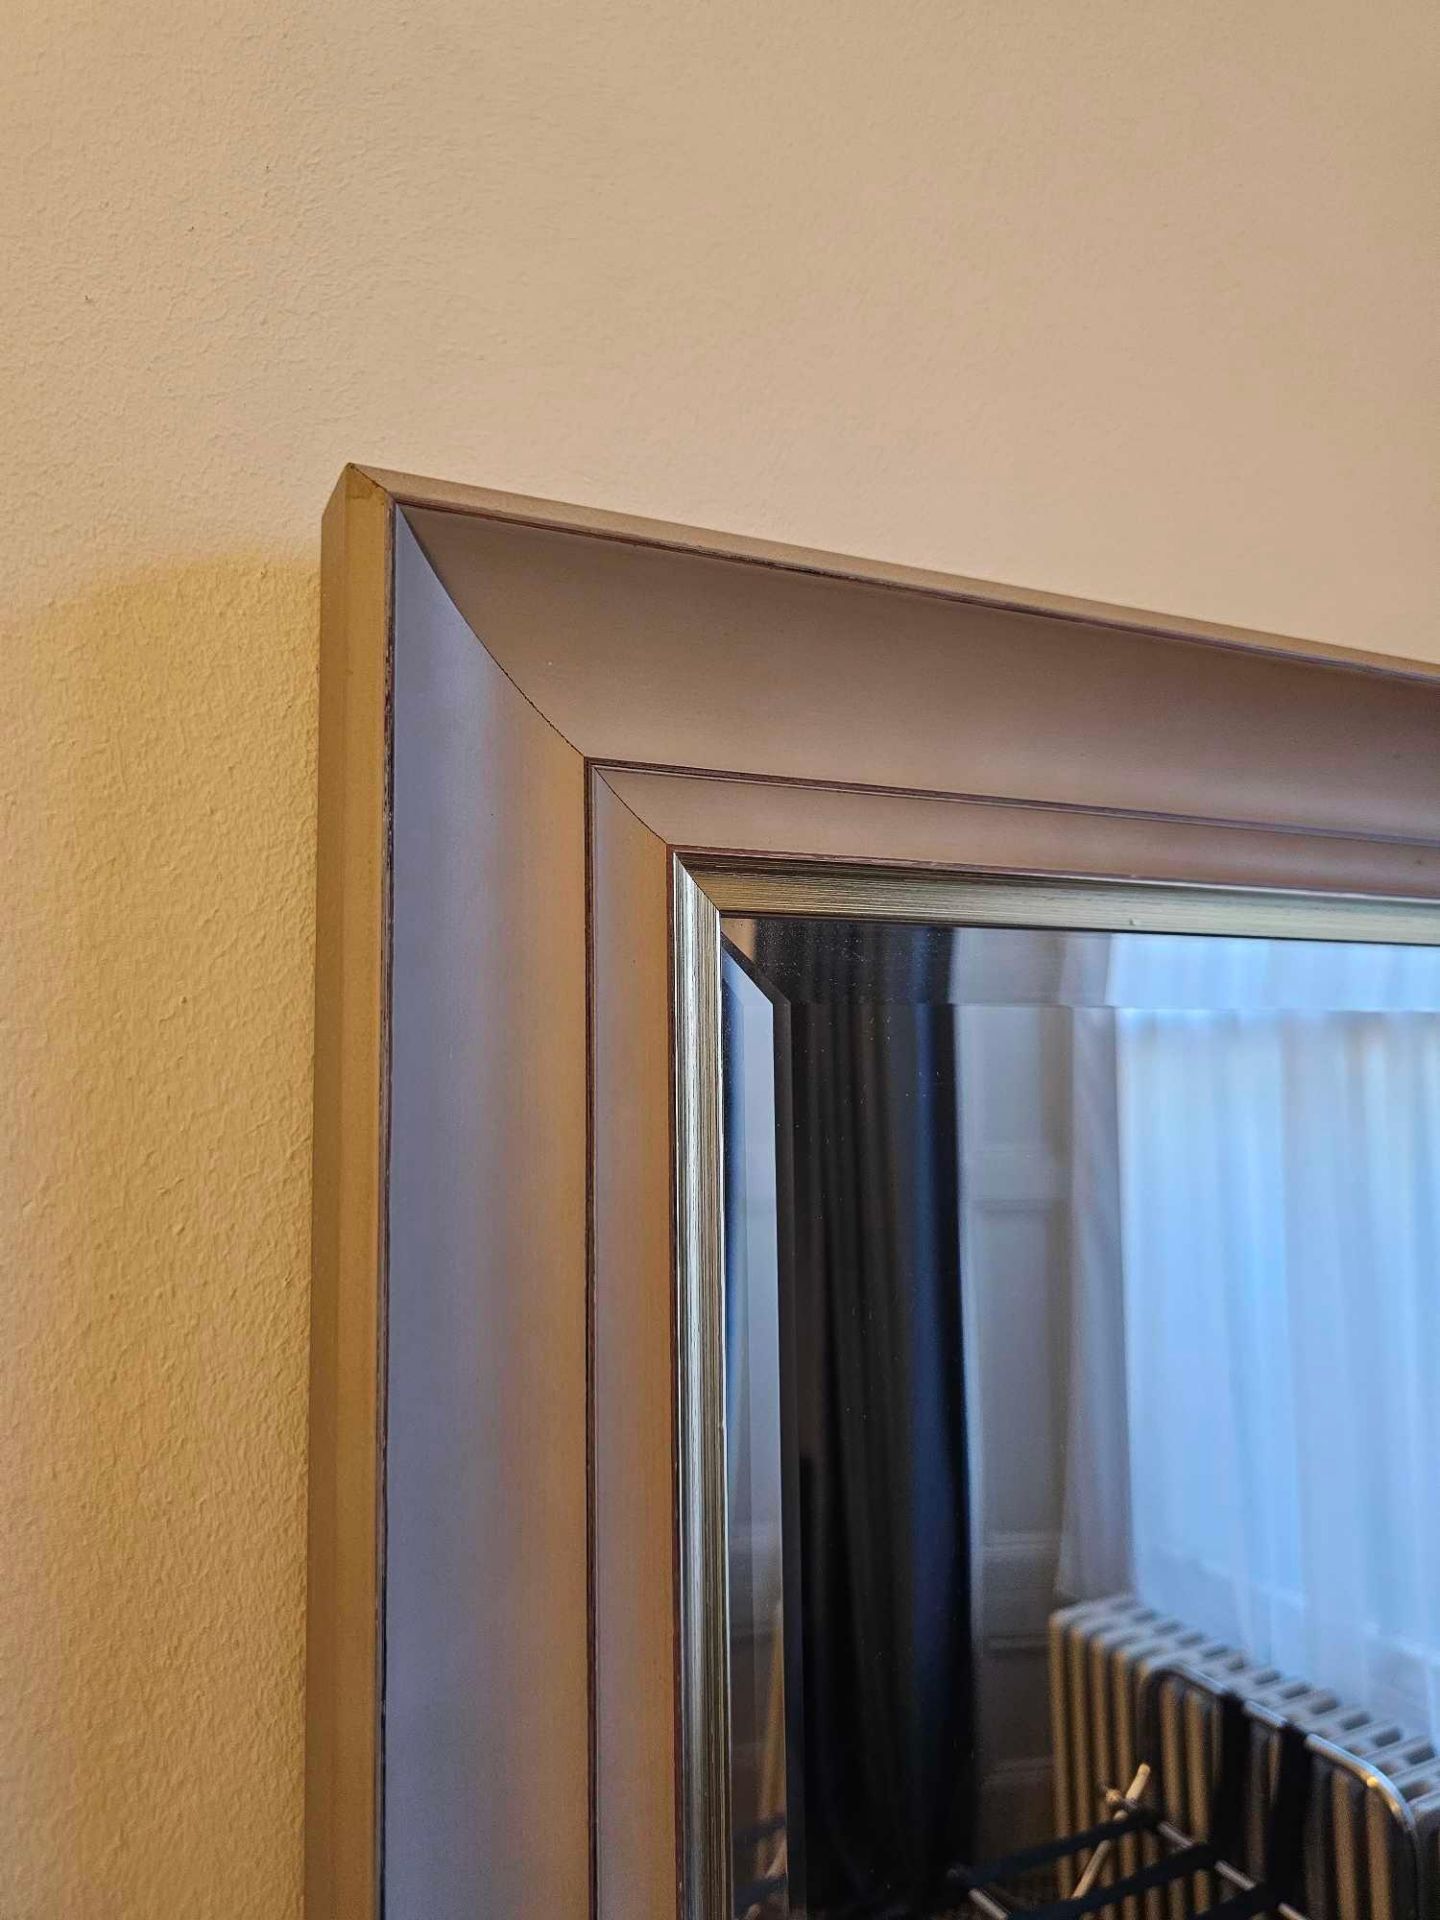 Modern Bevelled Accent Mirror Grey Timber Frame With Gold Trim Detailing 70 x 100cm (Loc: Room 114) - Image 2 of 2